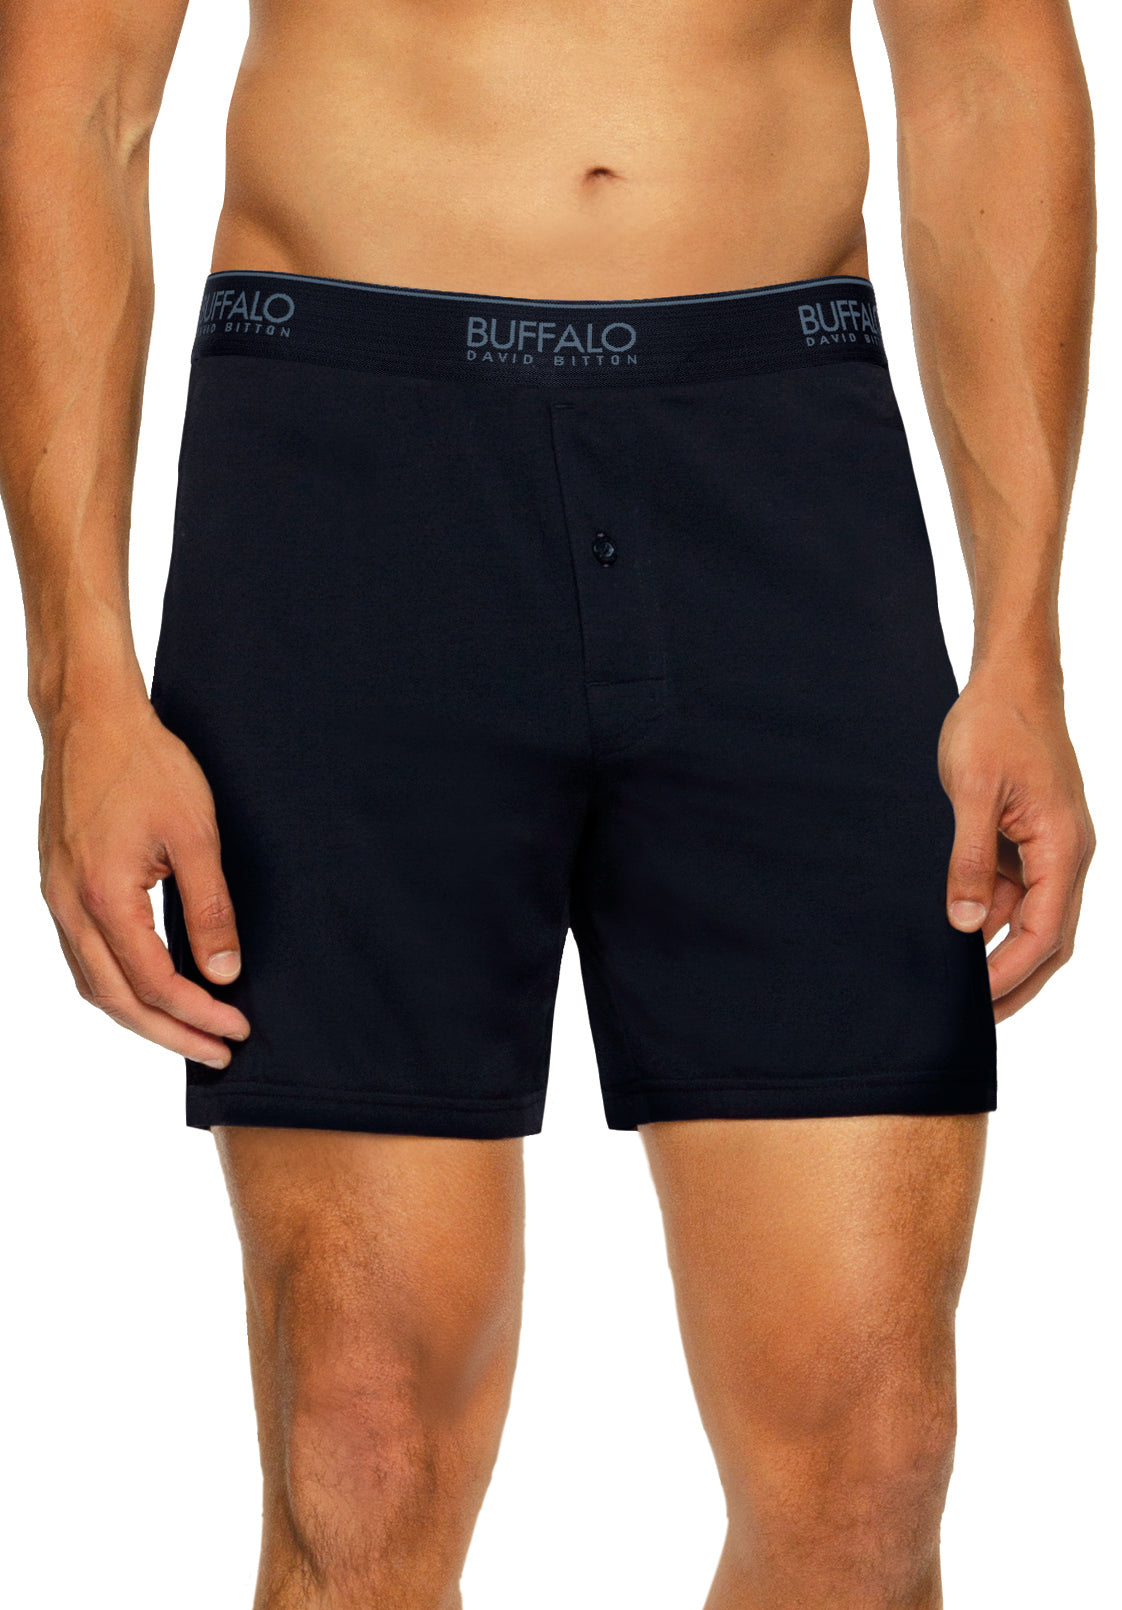 Aeropostale Buffalo Check Boxer Briefs (8.33 CAD) ❤ liked on